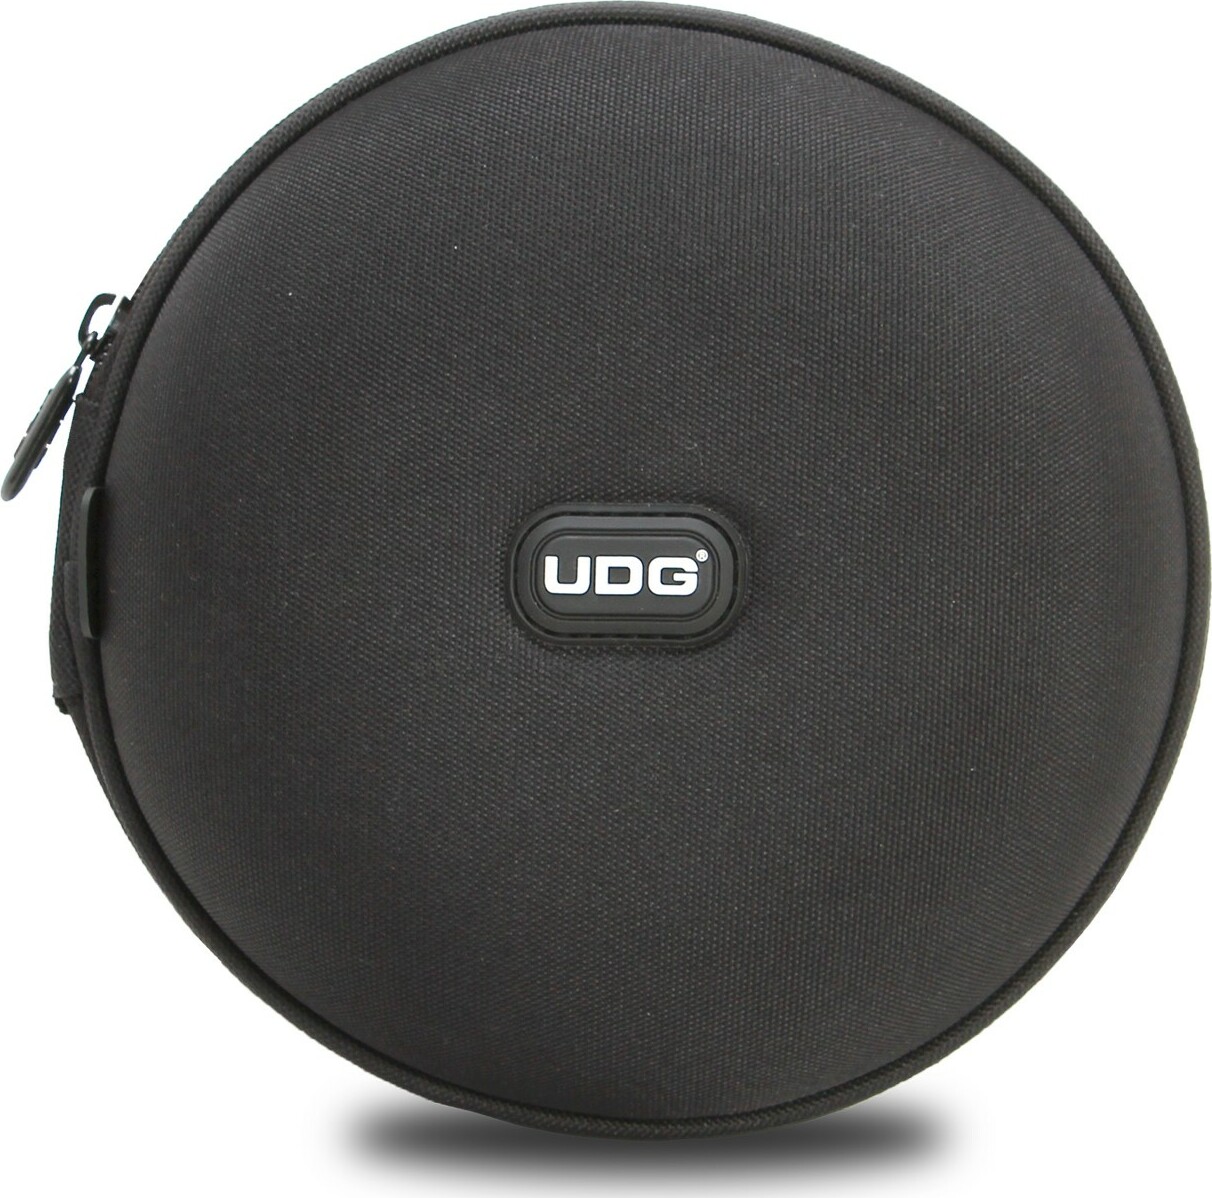 Udg Creator Headphone Hard Case Small Black - DJ hoes - Main picture